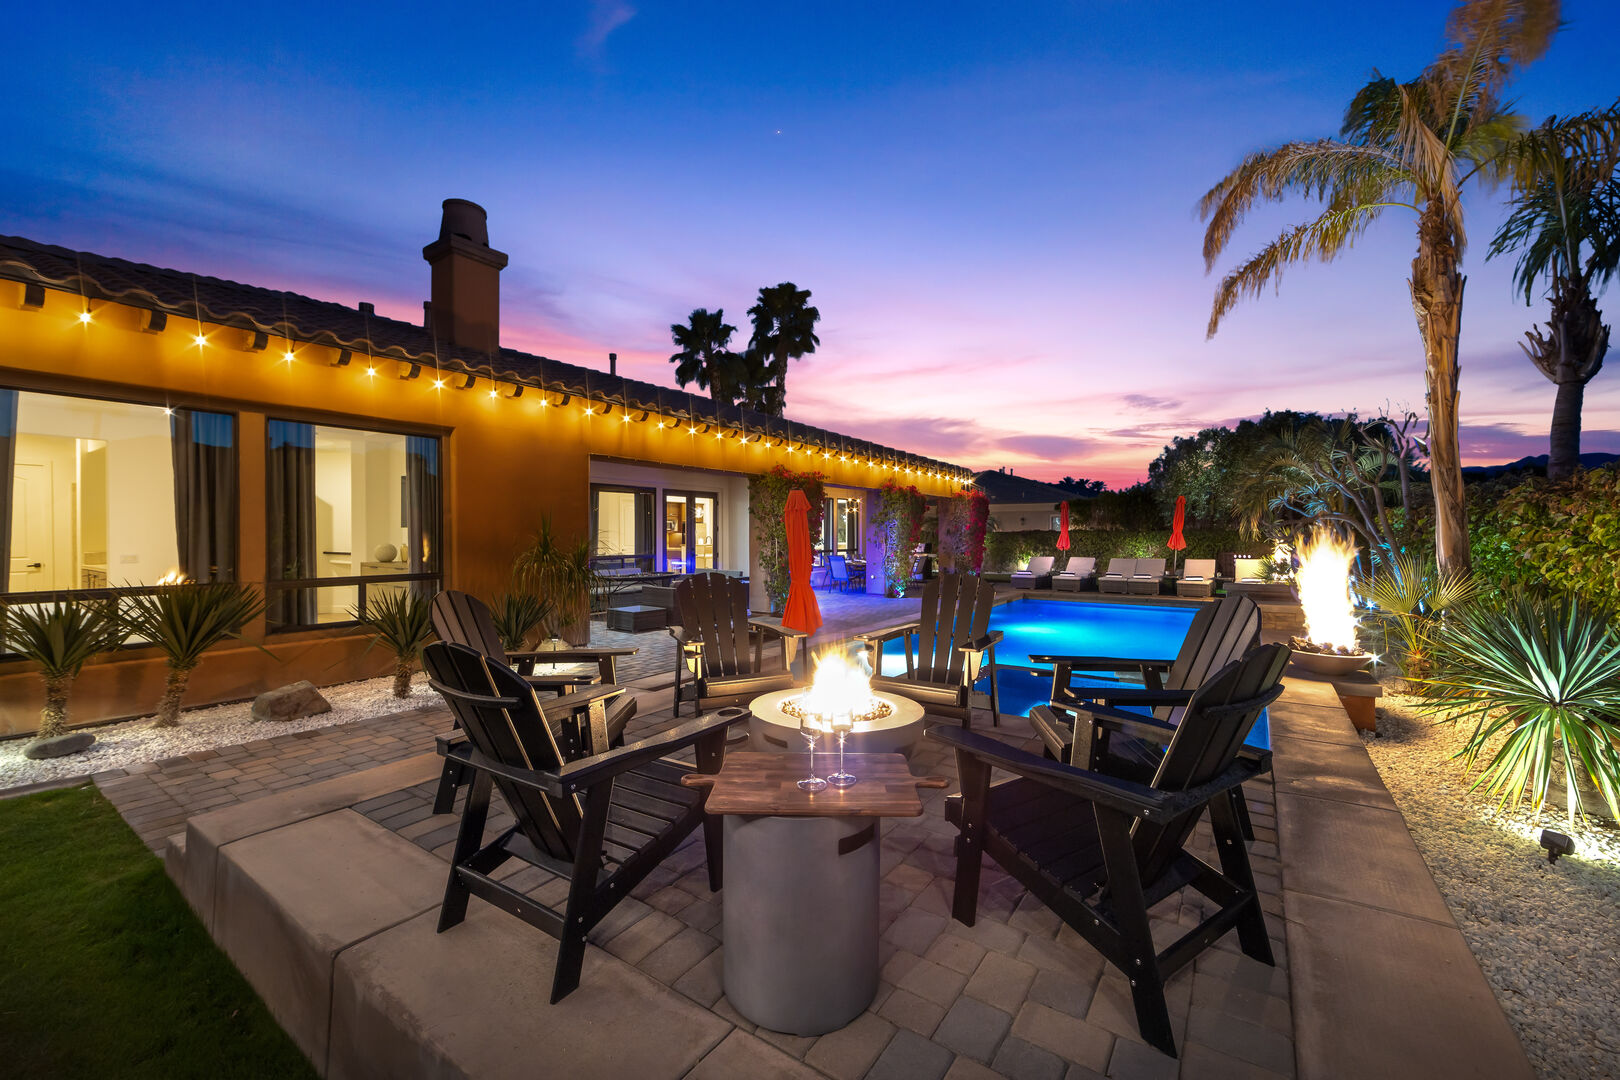 Gather 'round and let the warmth of the fire pit ignite unforgettable memories.